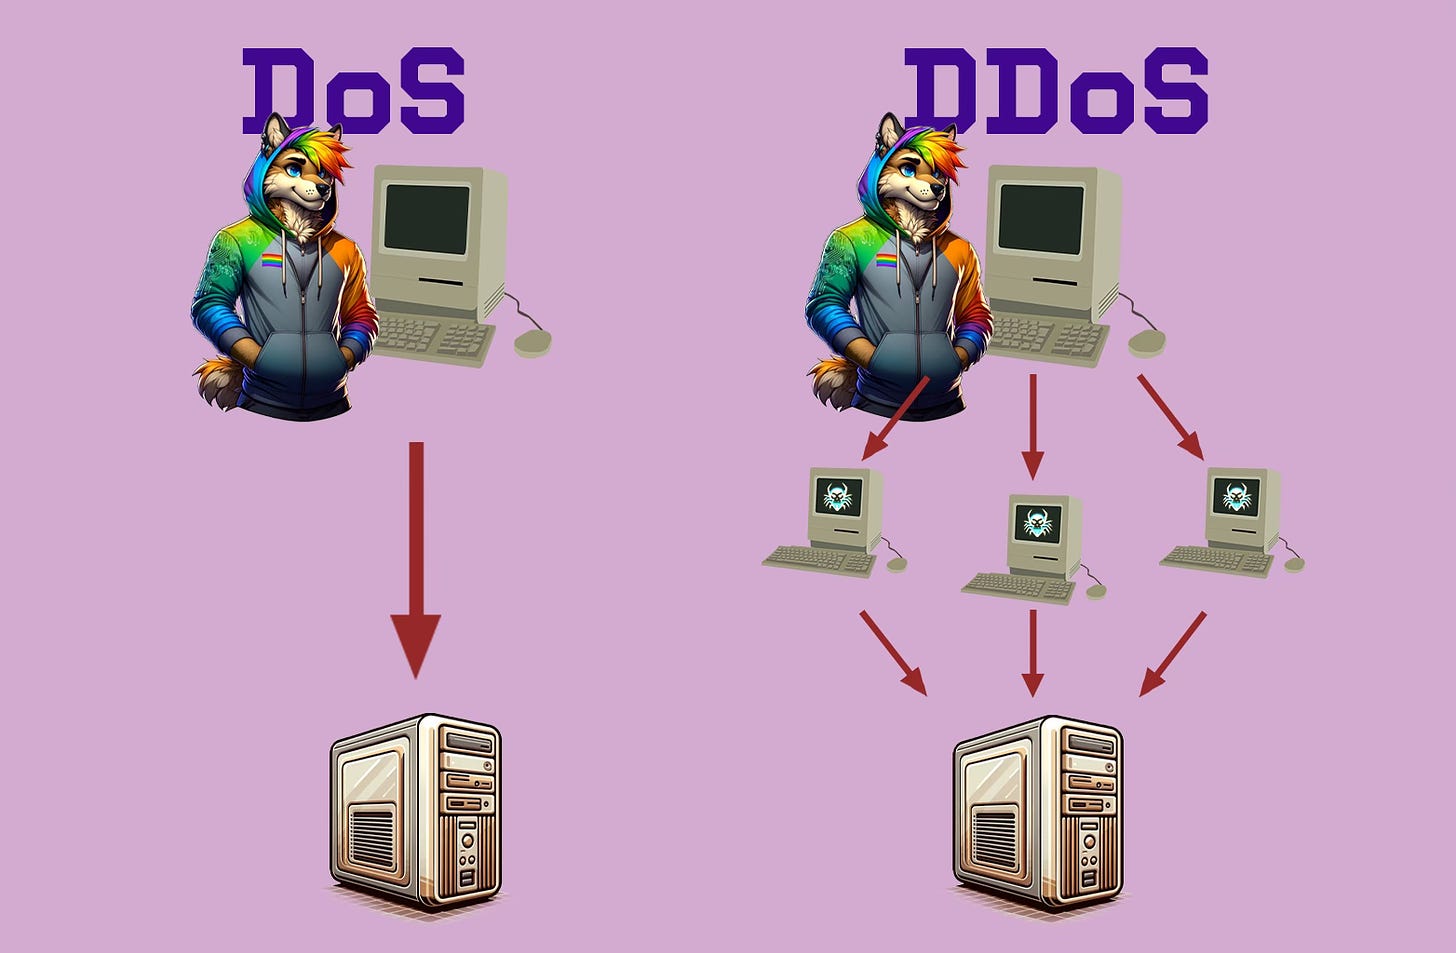 An informative diagram illustrating the difference between DoS (Denial of Service) and DDoS (Distributed Denial of Service) attacks. On the left, labeled 'DoS', a character resembling a rainbow-colored furry in a hoodie is standing next to a vintage-style computer, with an arrow pointing from the computer to a single modern desktop tower labeled 'DoS'. On the right, labeled 'DDoS', the same character and vintage computer are present, but this time there are multiple arrows pointing from the computer to several modern desktop towers, each with a virus symbol on the screen, illustrating a distributed attack. The background is a solid lavender color.